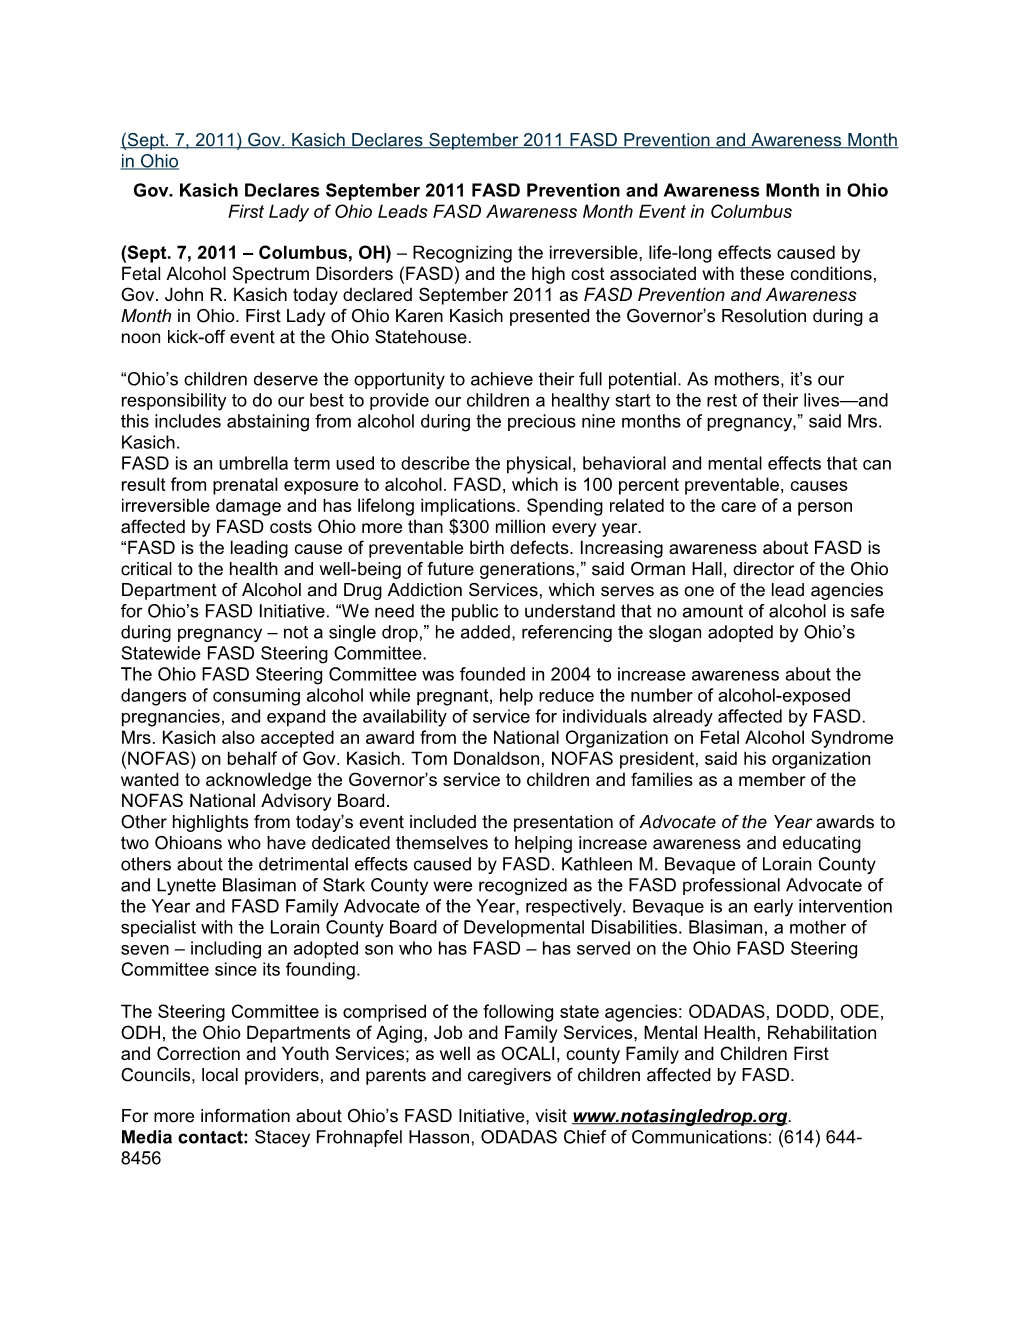 Gov. Kasich Declares September 2011 FASD Prevention and Awareness Month in Ohio